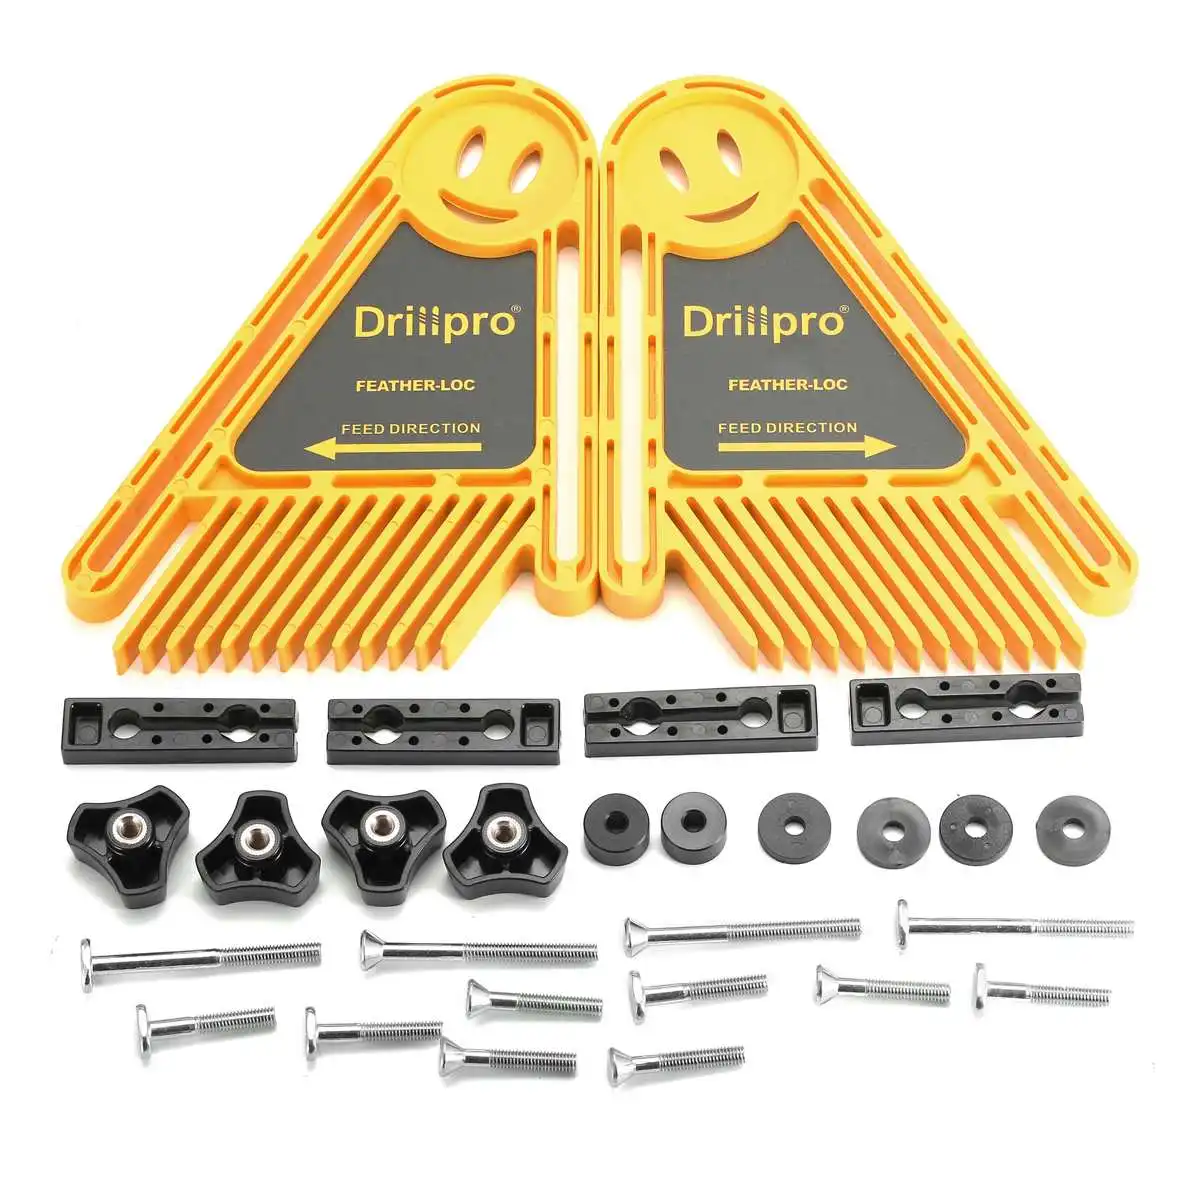 Drillpro 2pcs Multi-purpose Double Feather Board Set for Router Table Saws Miter Gauge Slot